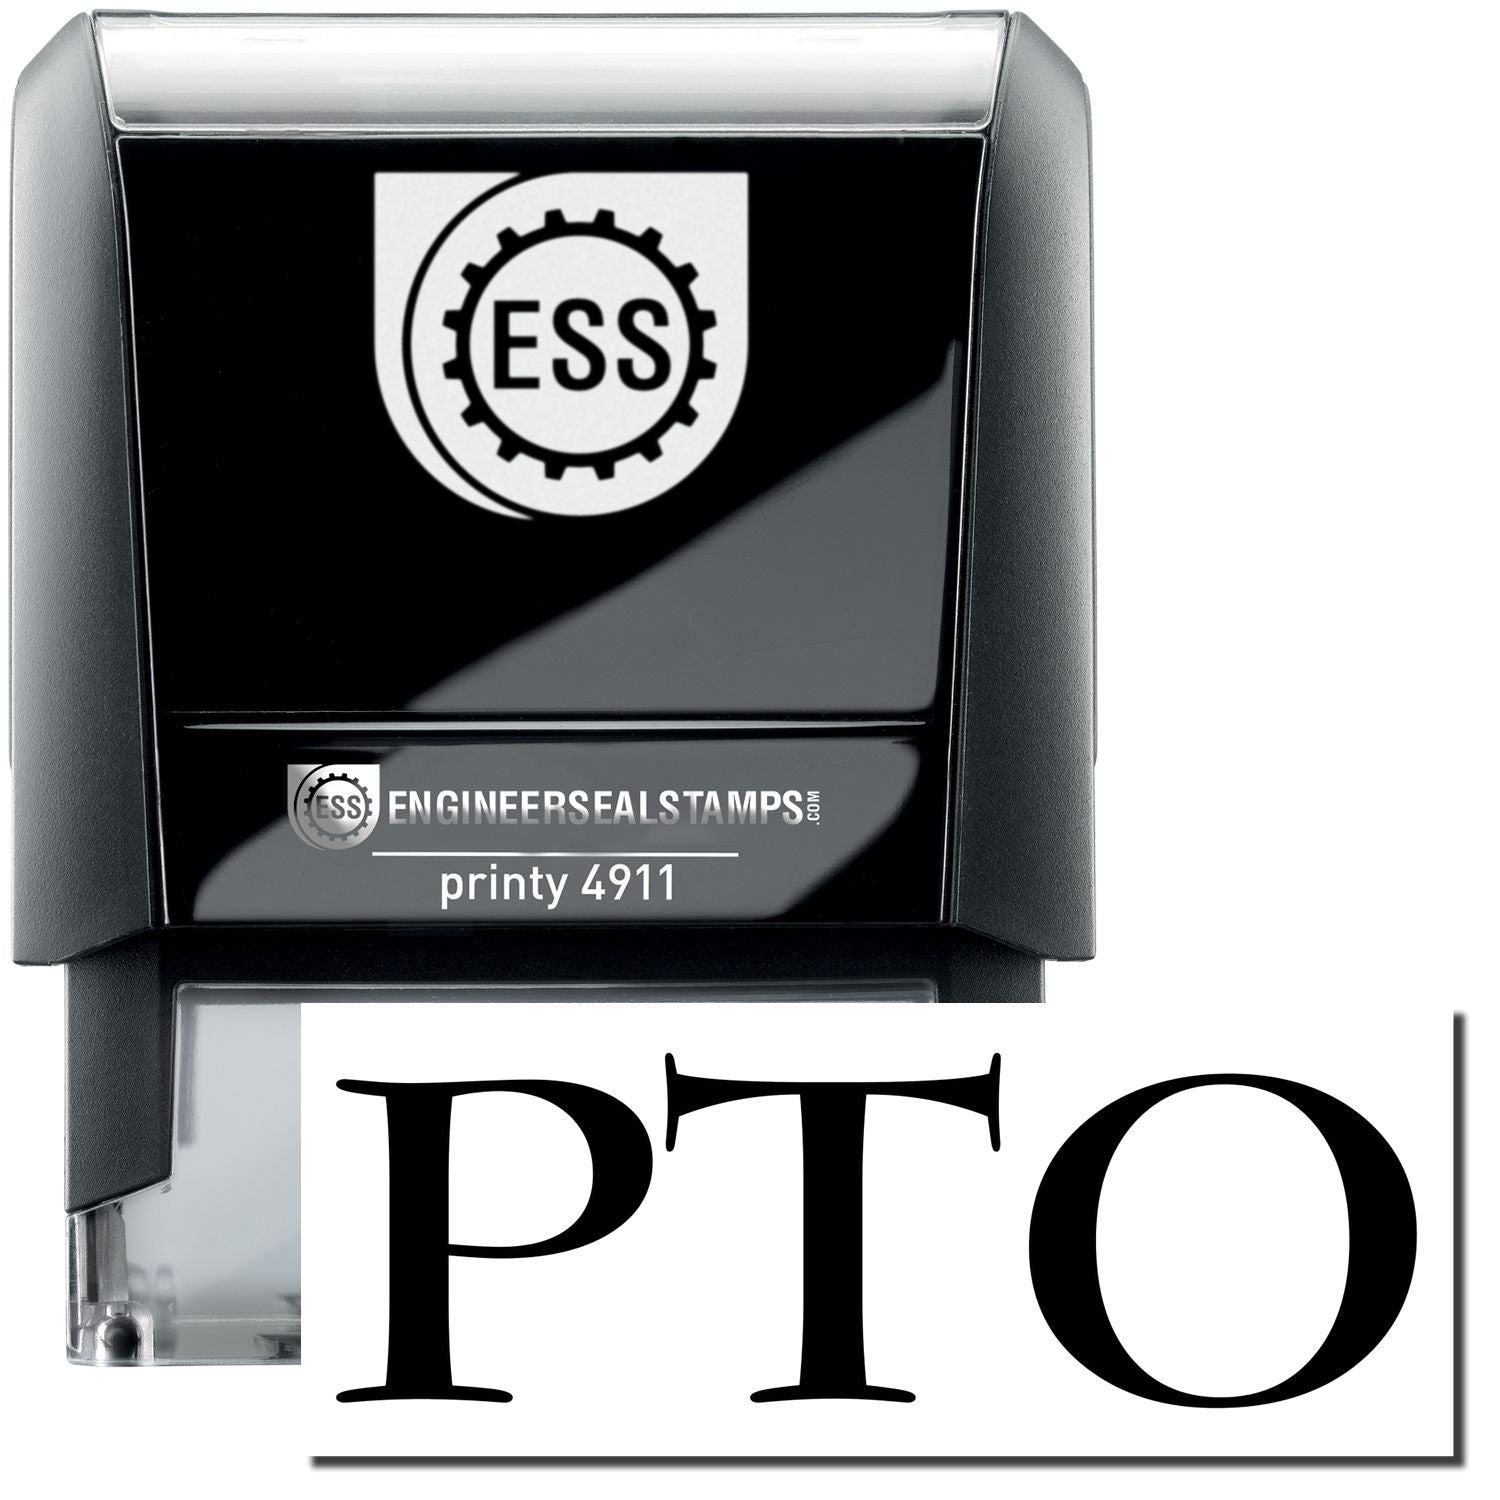 A self-inking stamp with a stamped image showing how the text "PTO" is displayed after stamping.